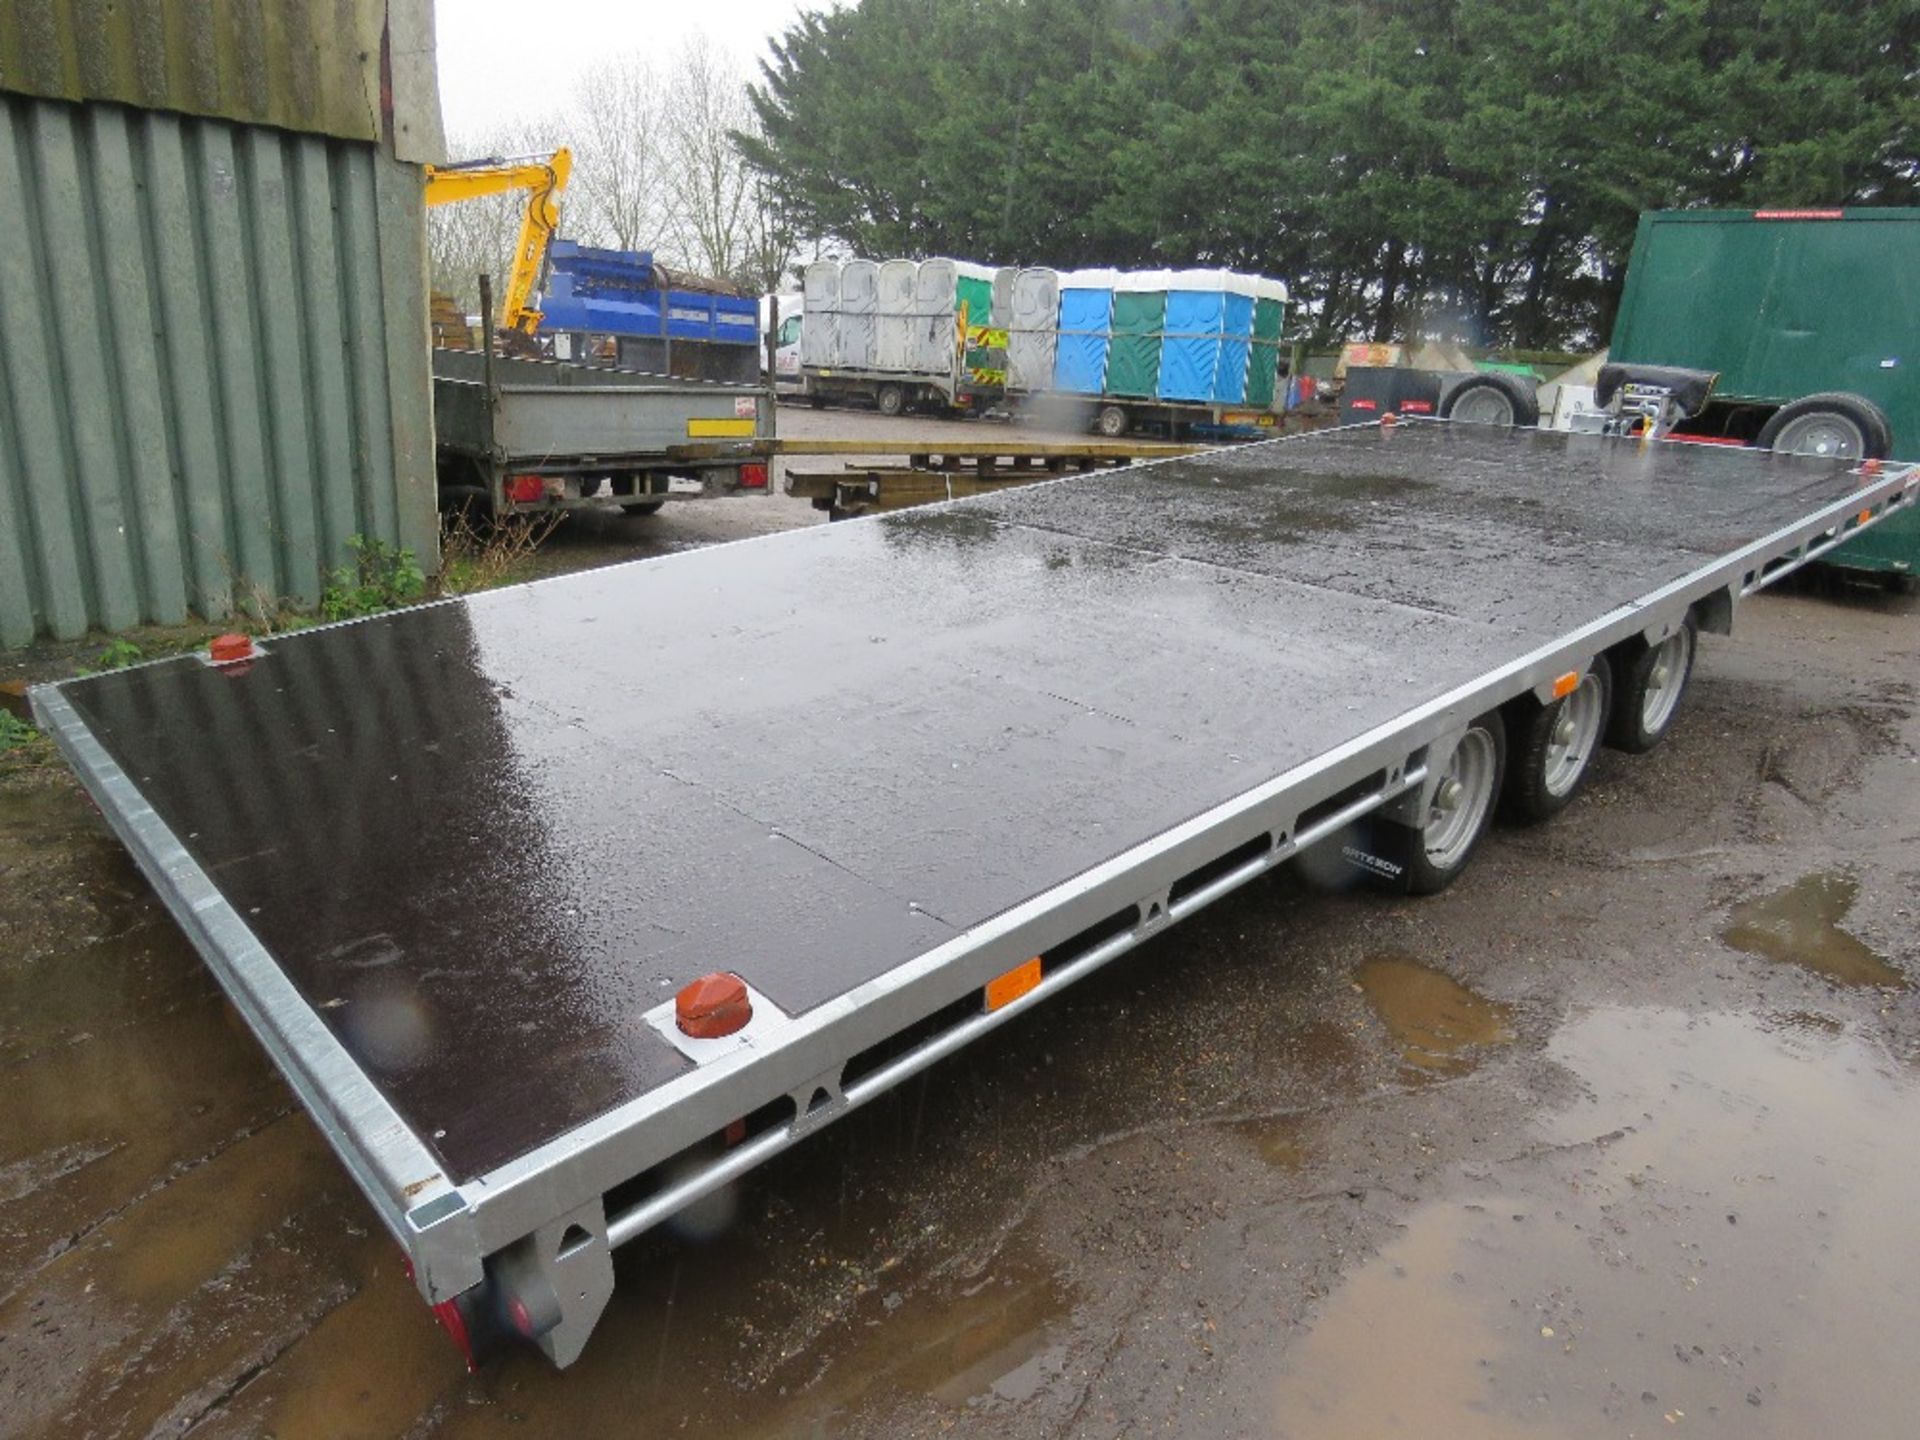 BATESON TILT BED TRIAXLE 3500KG FLAT TRAILER WITH WINCH 22FT LENGTH X 8FT WIDTH. WITH RAMPS UNDERNEA - Image 4 of 11